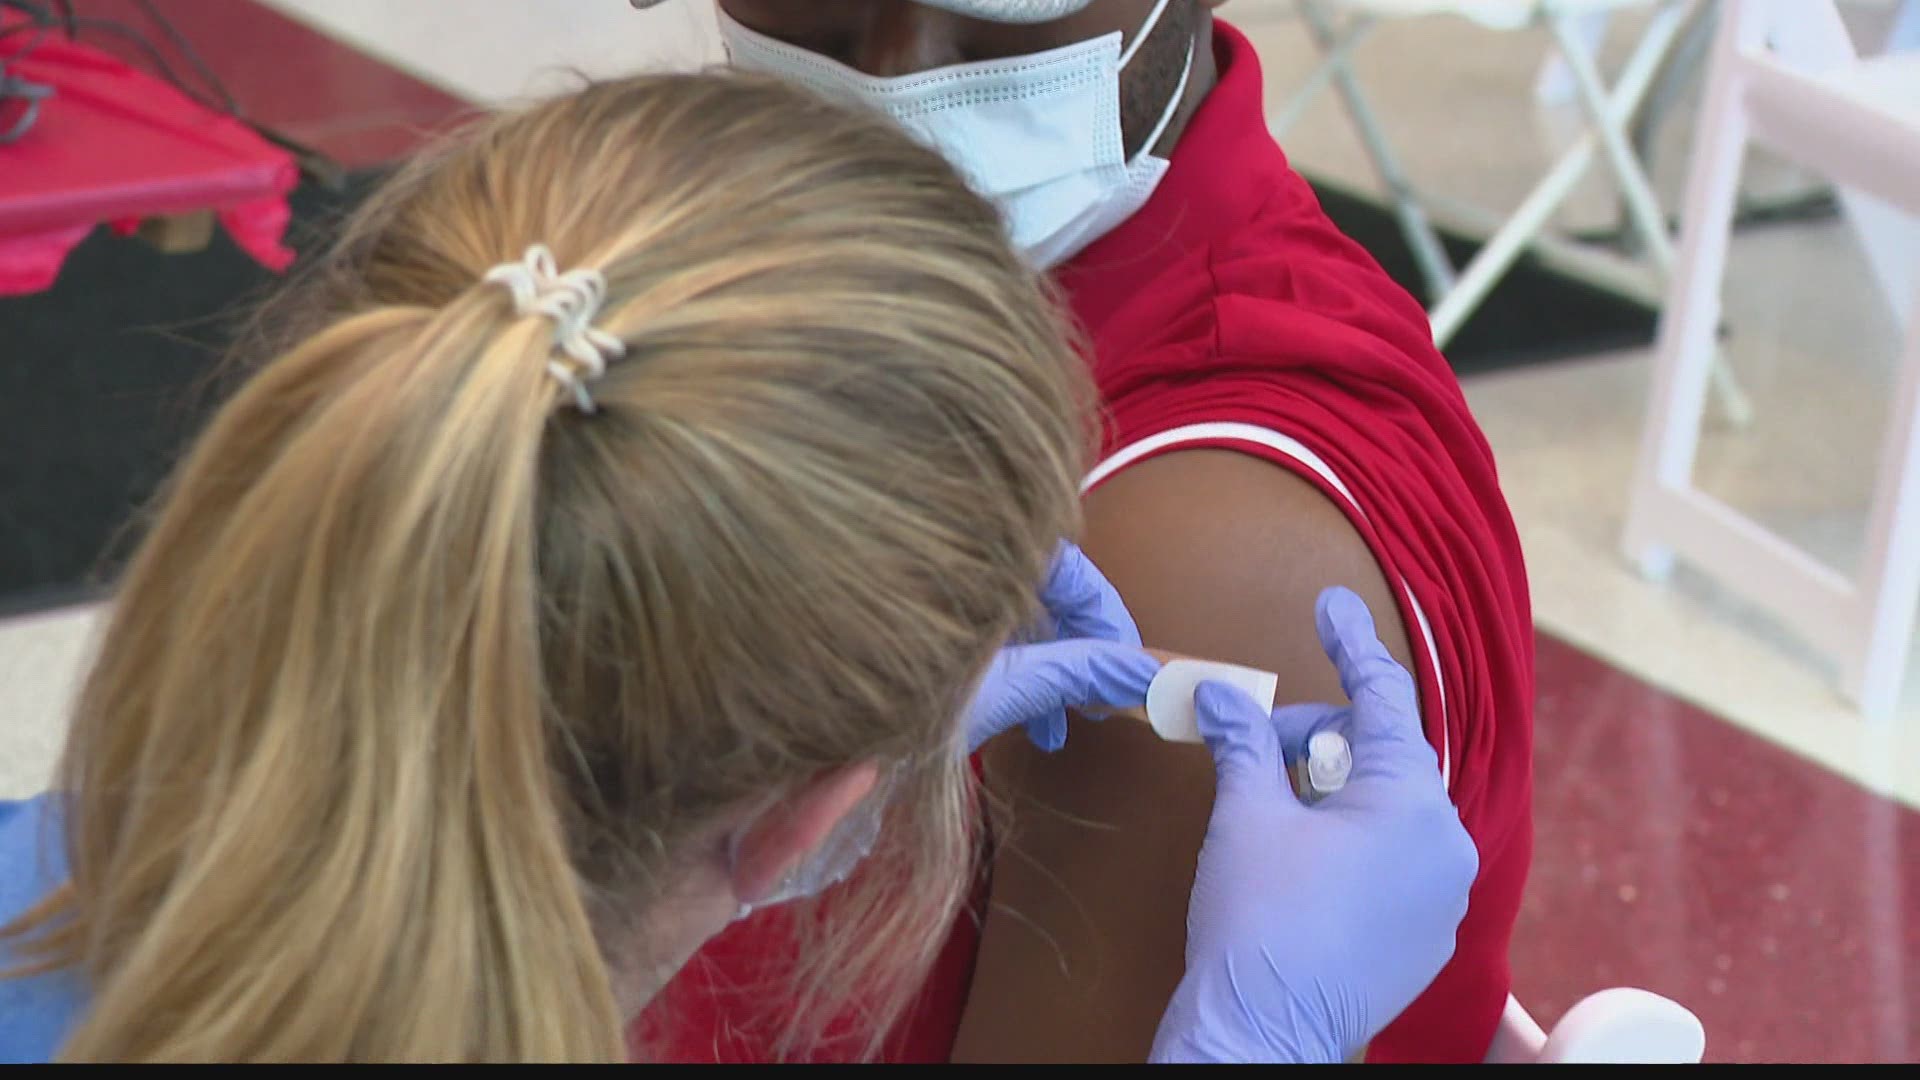 To have a 'mostly normal' Fall on college campuses, vaccination rates need to increase, experts say.